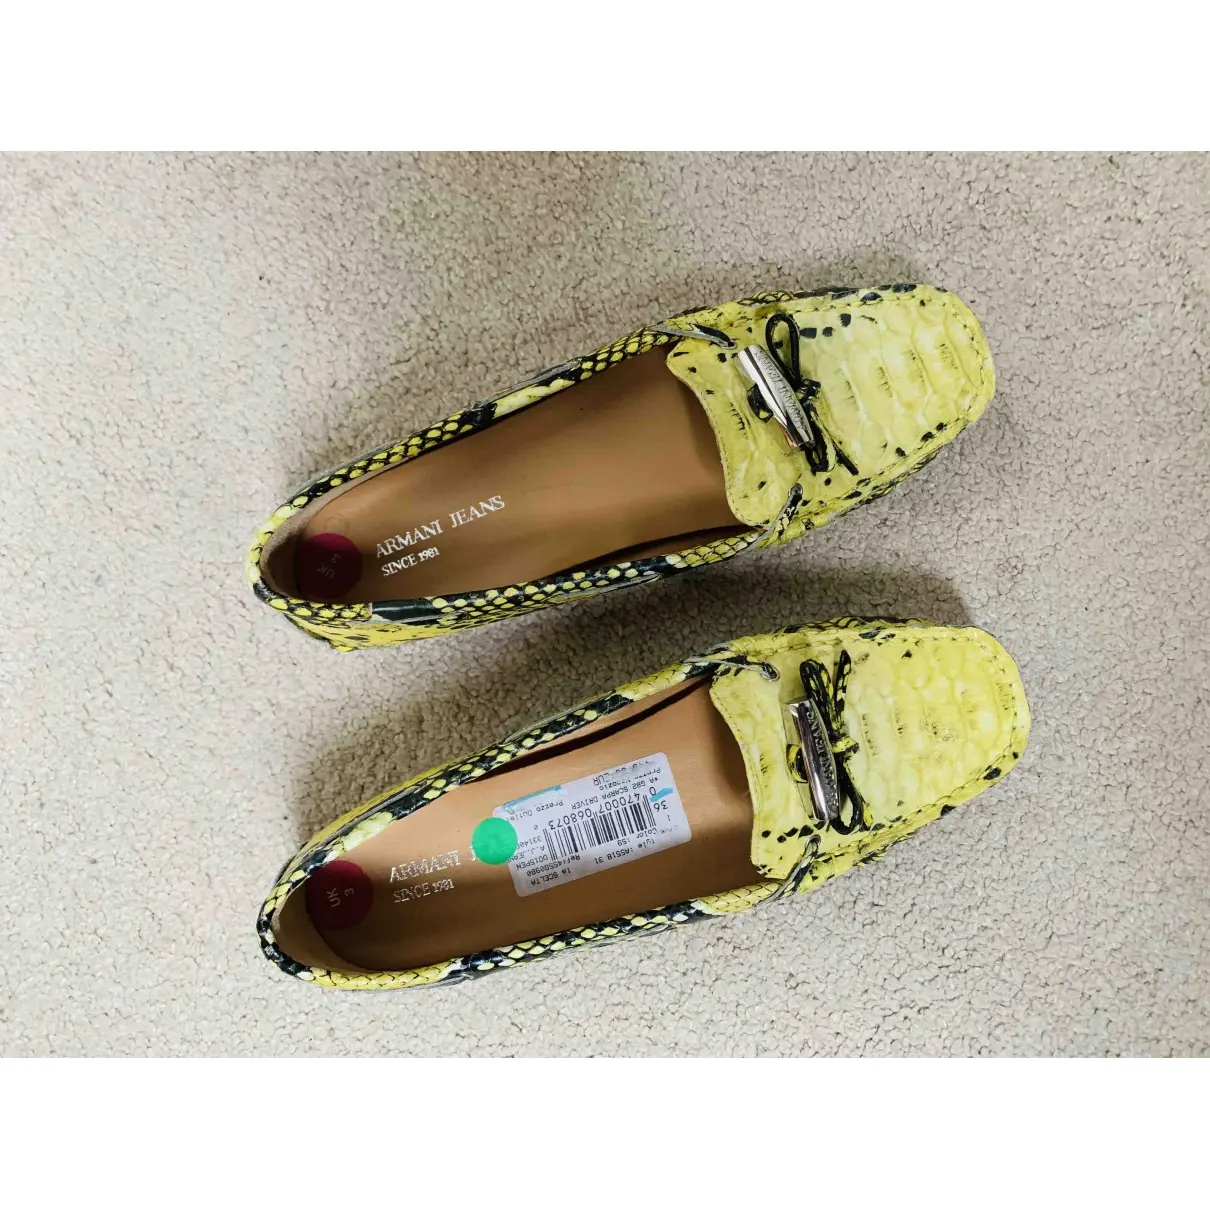 Armani Jeans Leather flats for sale